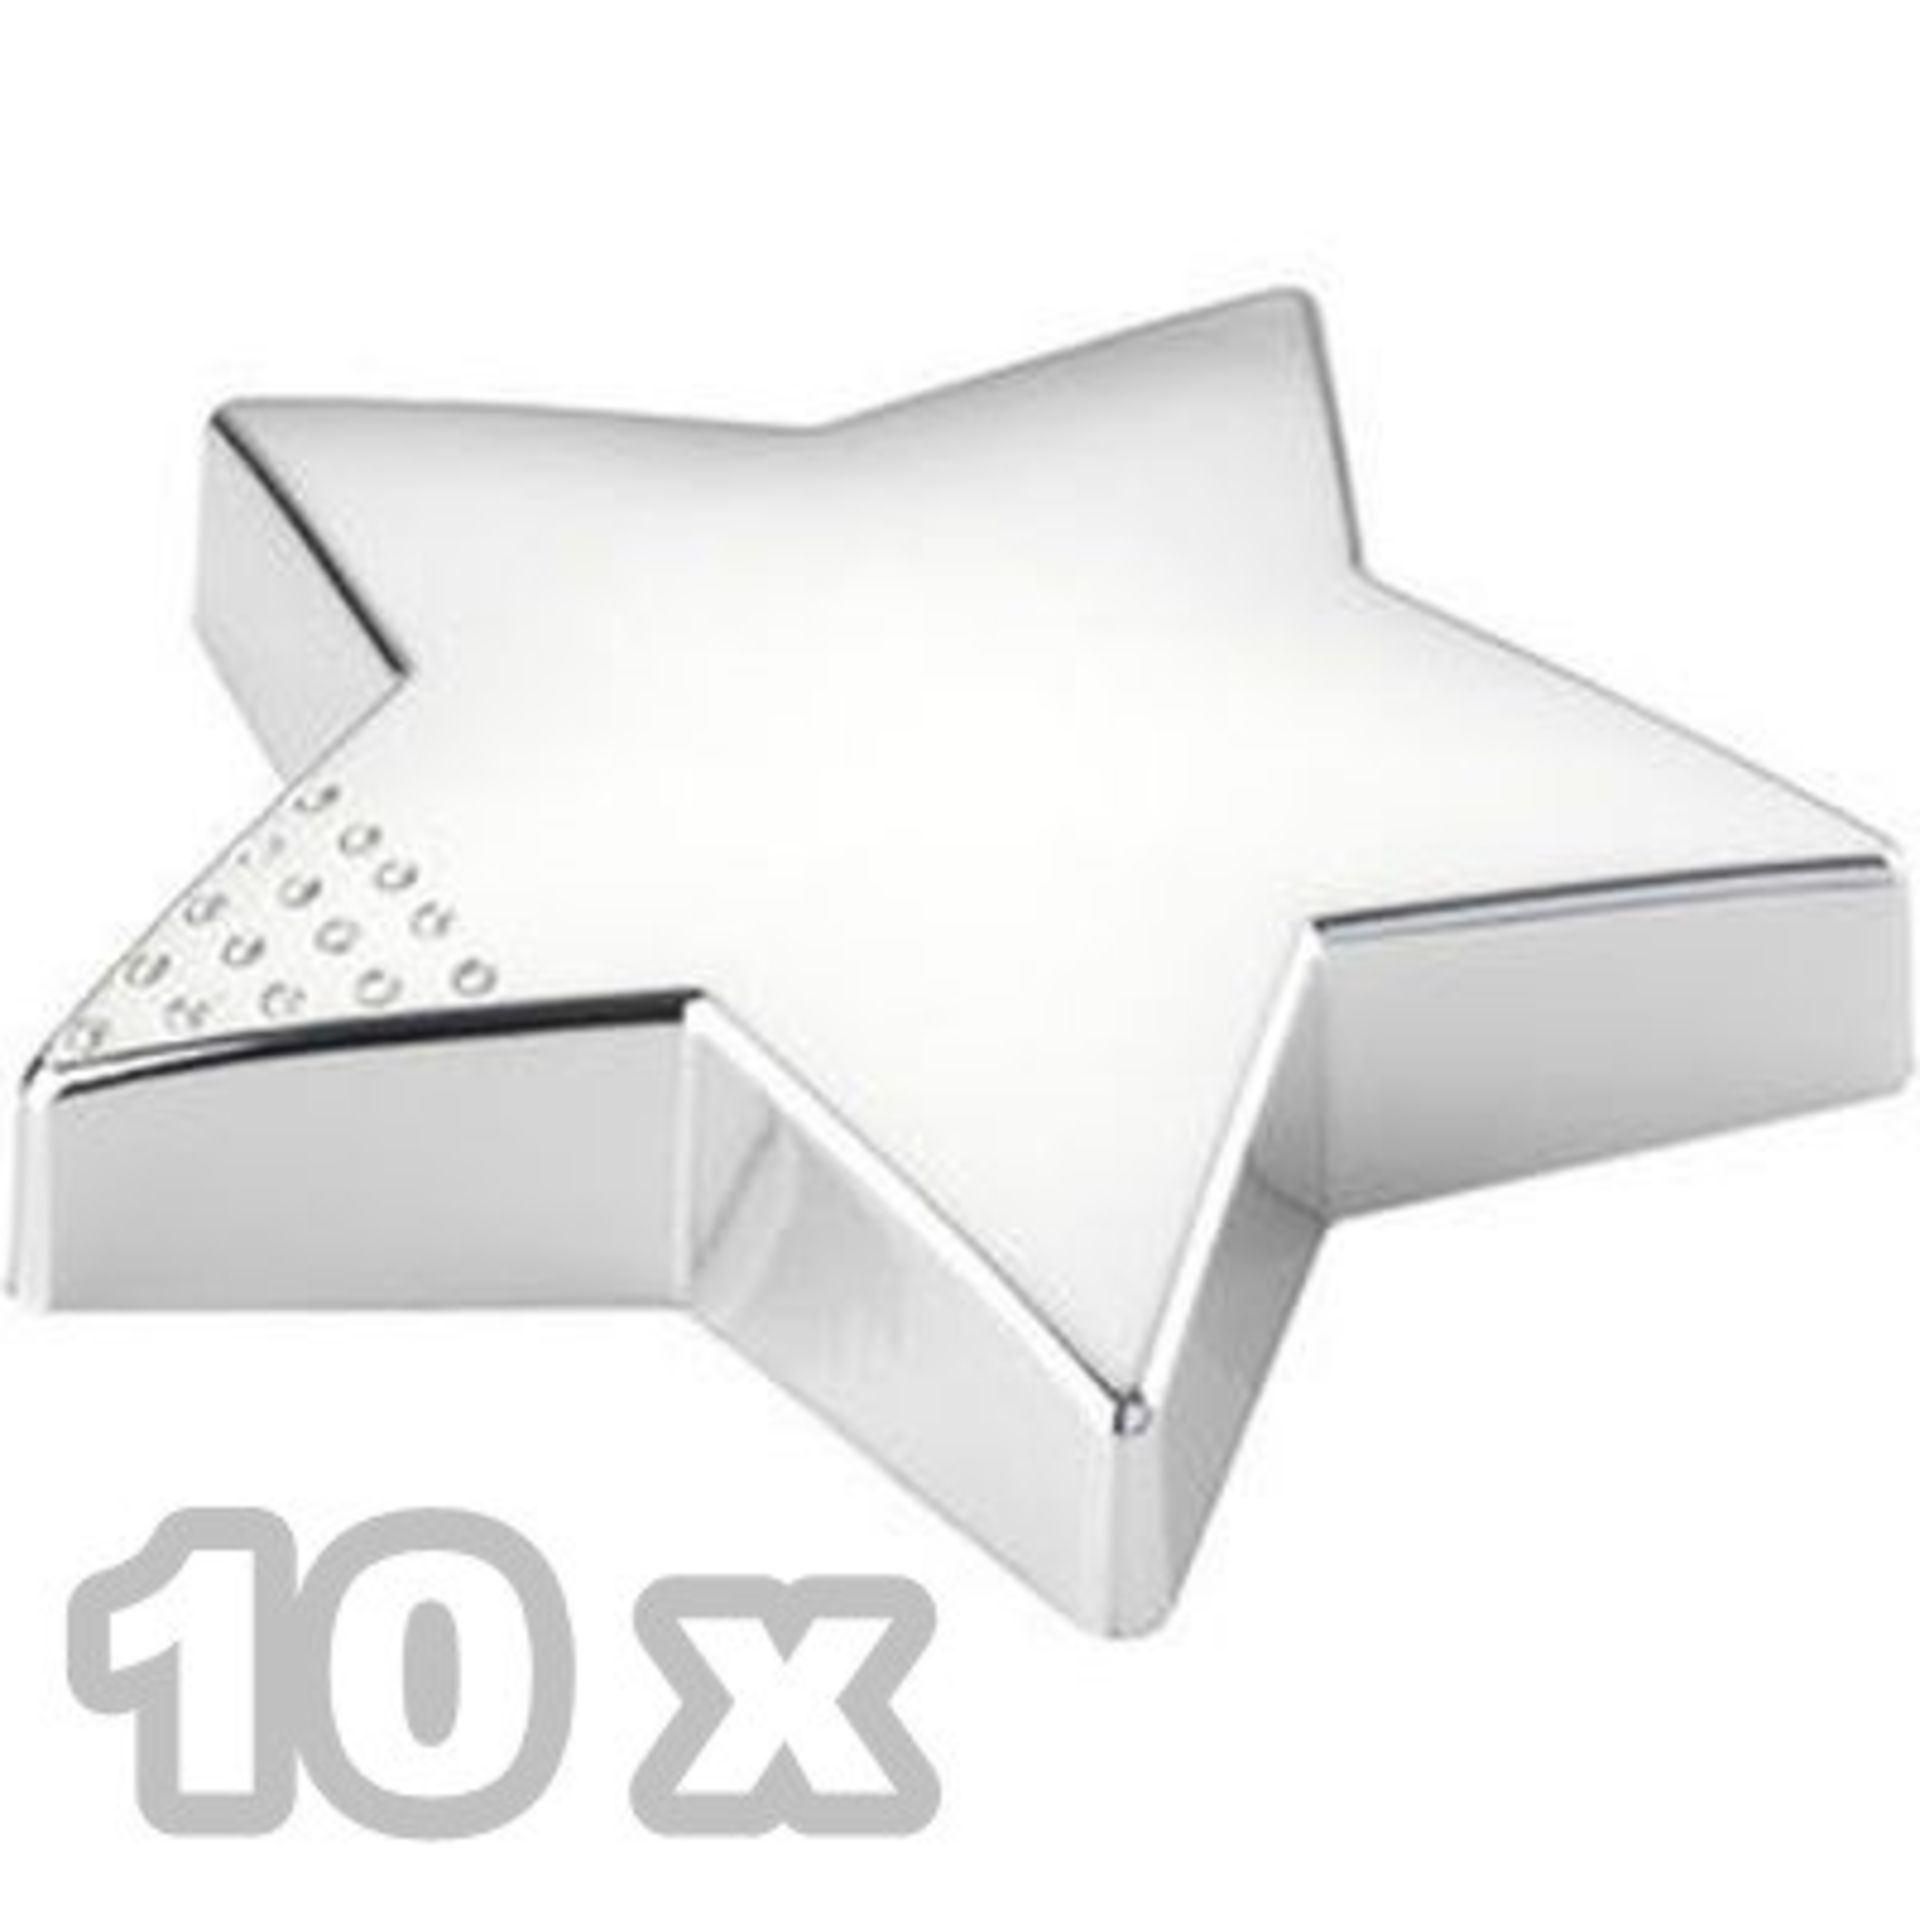 10 x Ice London Luxury Silver-Plated Paperweights - Made With Swarovski Elements - Brand New &